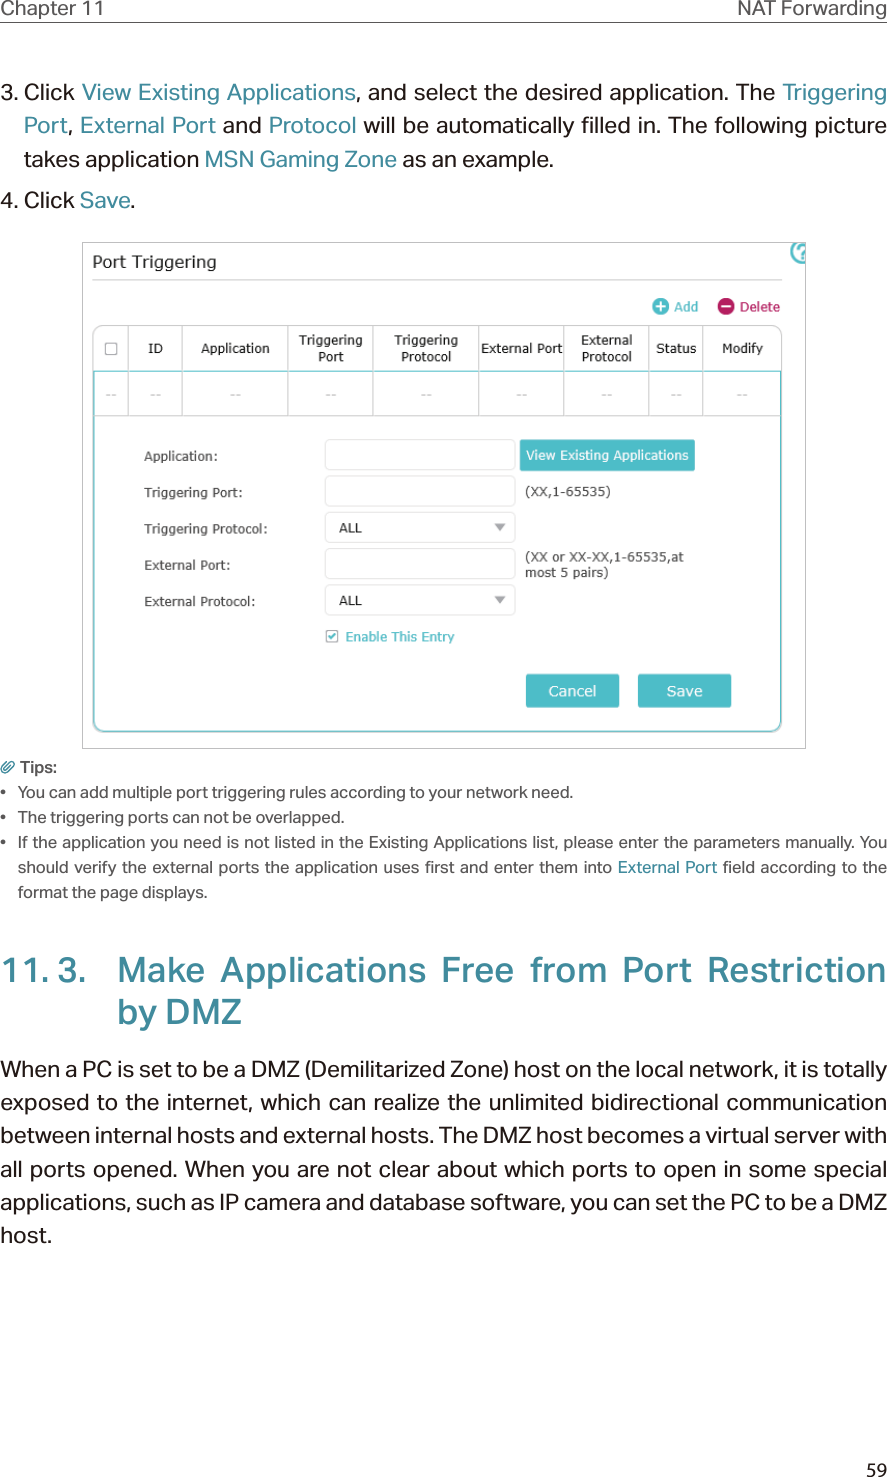 59Chapter 11 NAT Forwarding3. Click View Existing Applications, and select the desired application. The Triggering Port, External Port and Protocol will be automatically filled in. The following picture takes application MSN Gaming Zone as an example.4. Click Save.Tips:•  You can add multiple port triggering rules according to your network need.•  The triggering ports can not be overlapped.•  If the application you need is not listed in the Existing Applications list, please enter the parameters manually. You should verify the external ports the application uses first and enter them into External Port field according to the format the page displays.11. 3.  Make Applications Free from Port Restriction by DMZWhen a PC is set to be a DMZ (Demilitarized Zone) host on the local network, it is totally exposed to the internet, which can realize the unlimited bidirectional communication between internal hosts and external hosts. The DMZ host becomes a virtual server with all ports opened. When you are not clear about which ports to open in some special applications, such as IP camera and database software, you can set the PC to be a DMZ host.